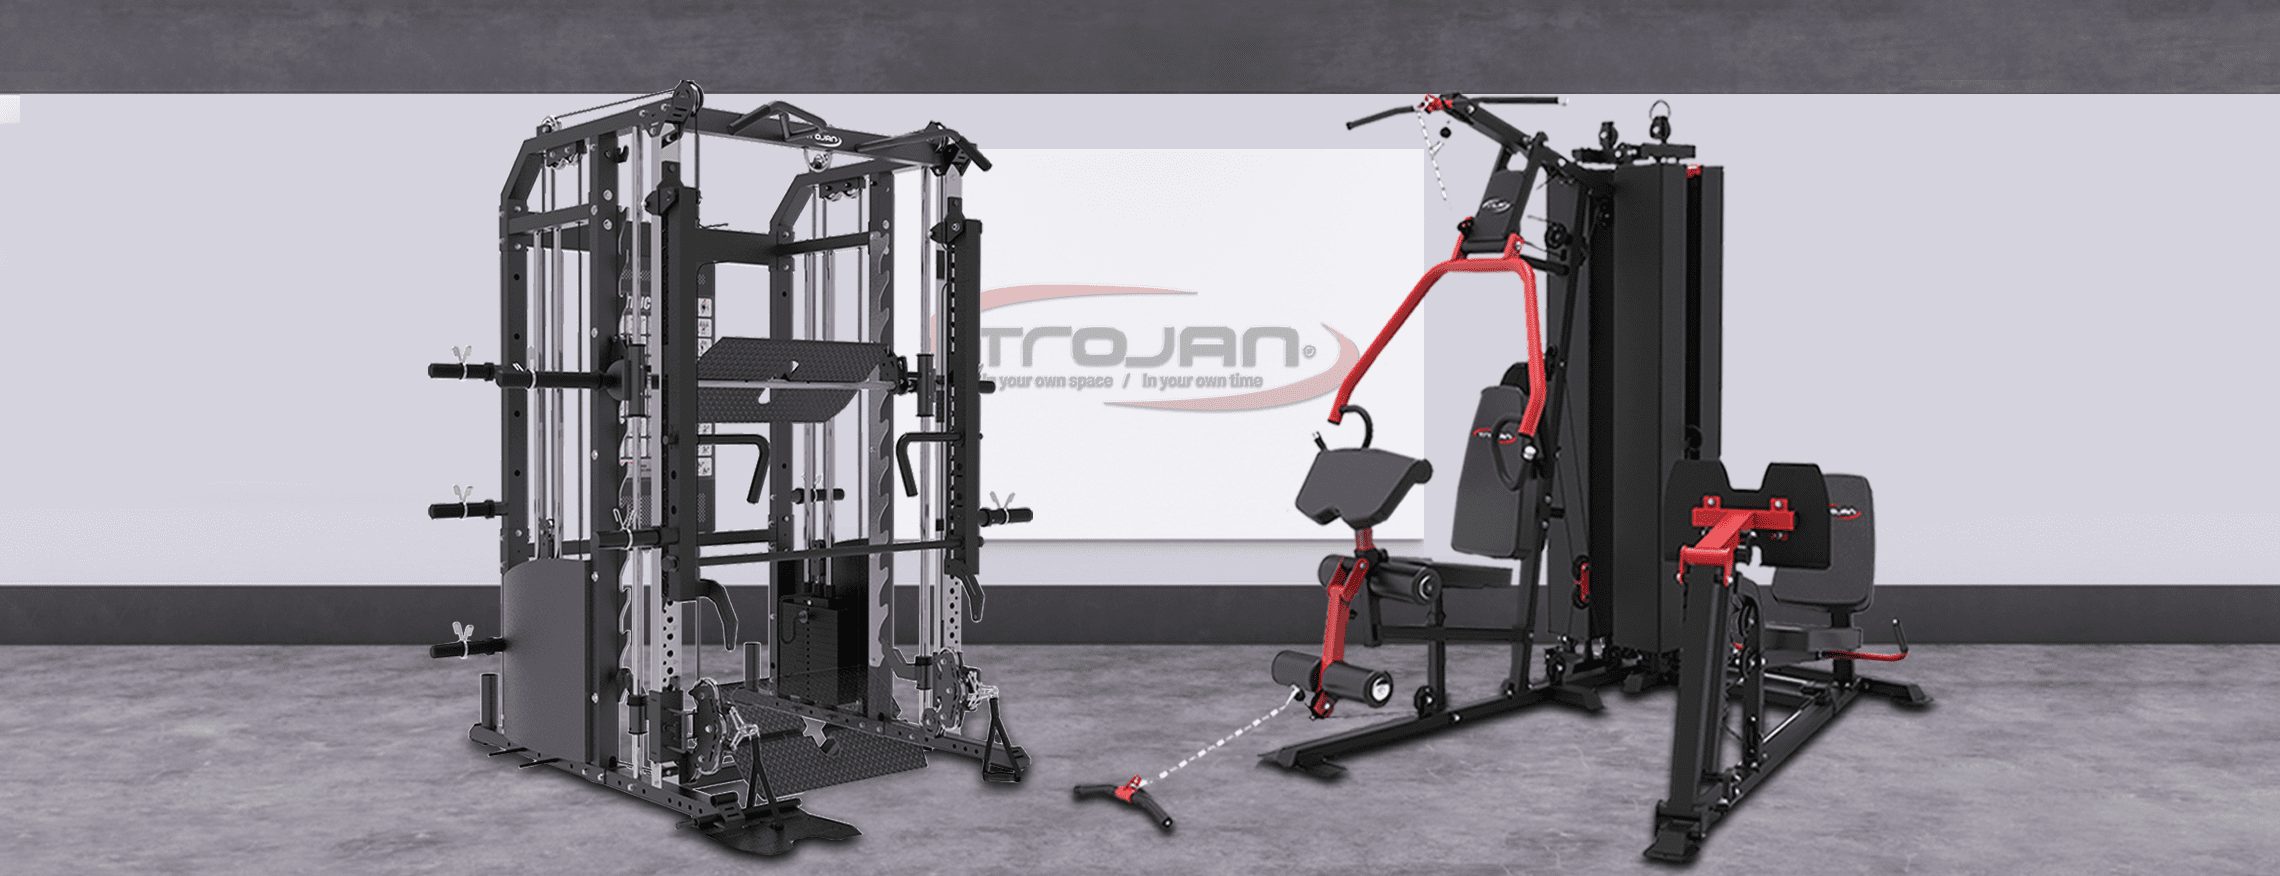 Best Home Gym and Personal Training Equipment Range of Smith Machine copy Copy